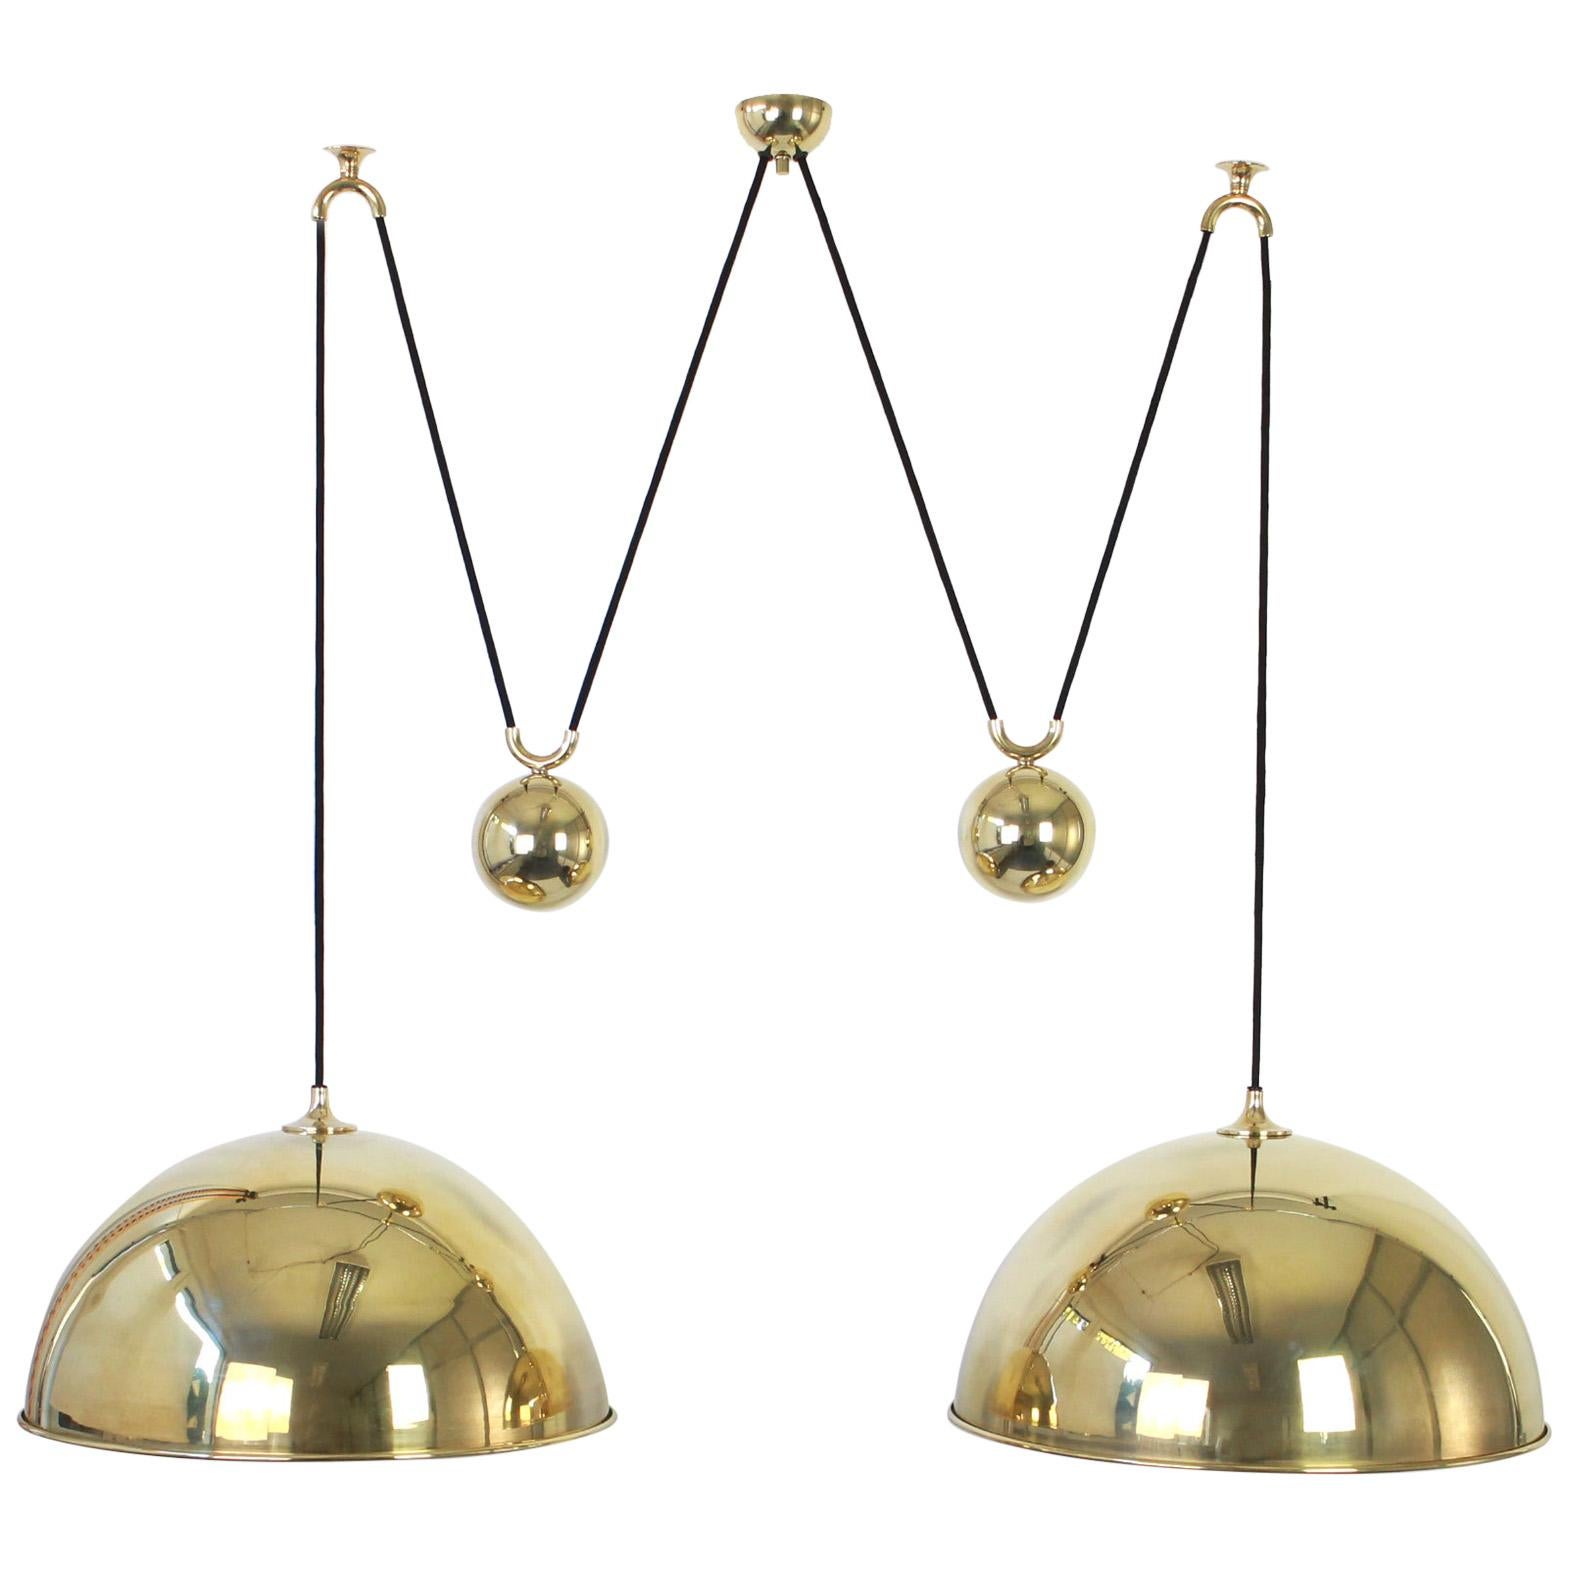 Stunning Double Brass Pendant with Adjustable Counter Weights by Florian Schulz